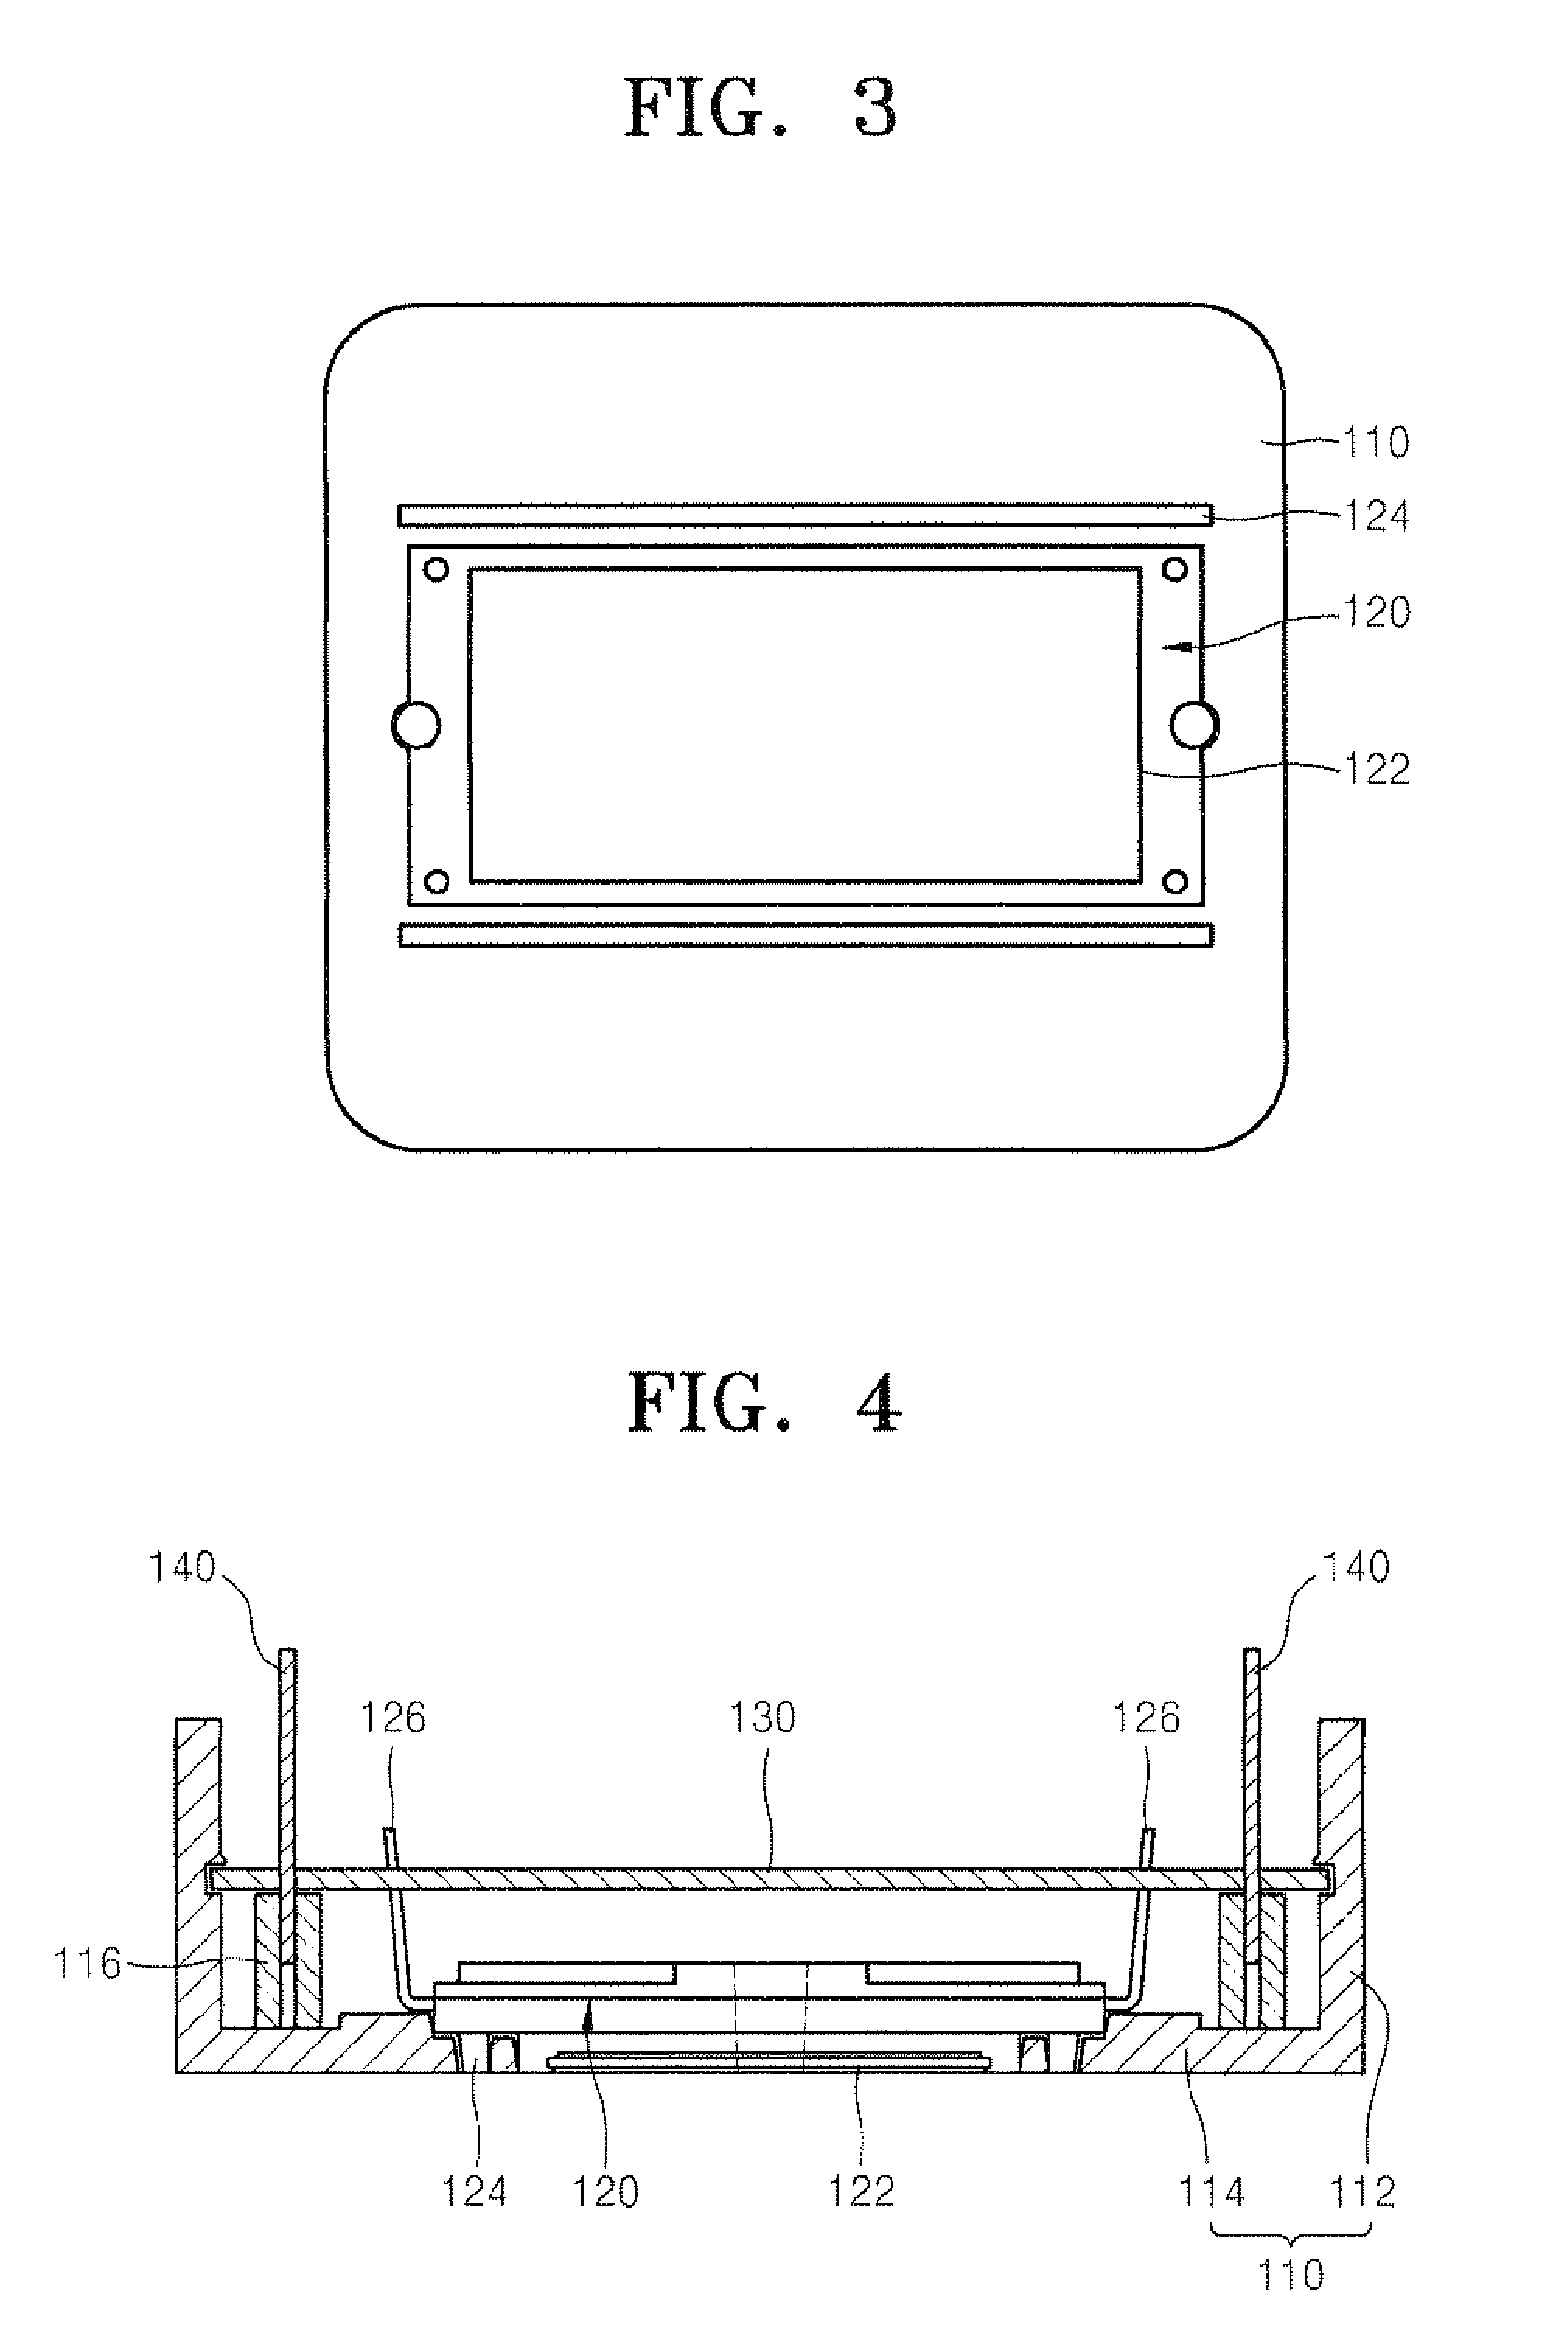 Power system module and method of fabricating the same